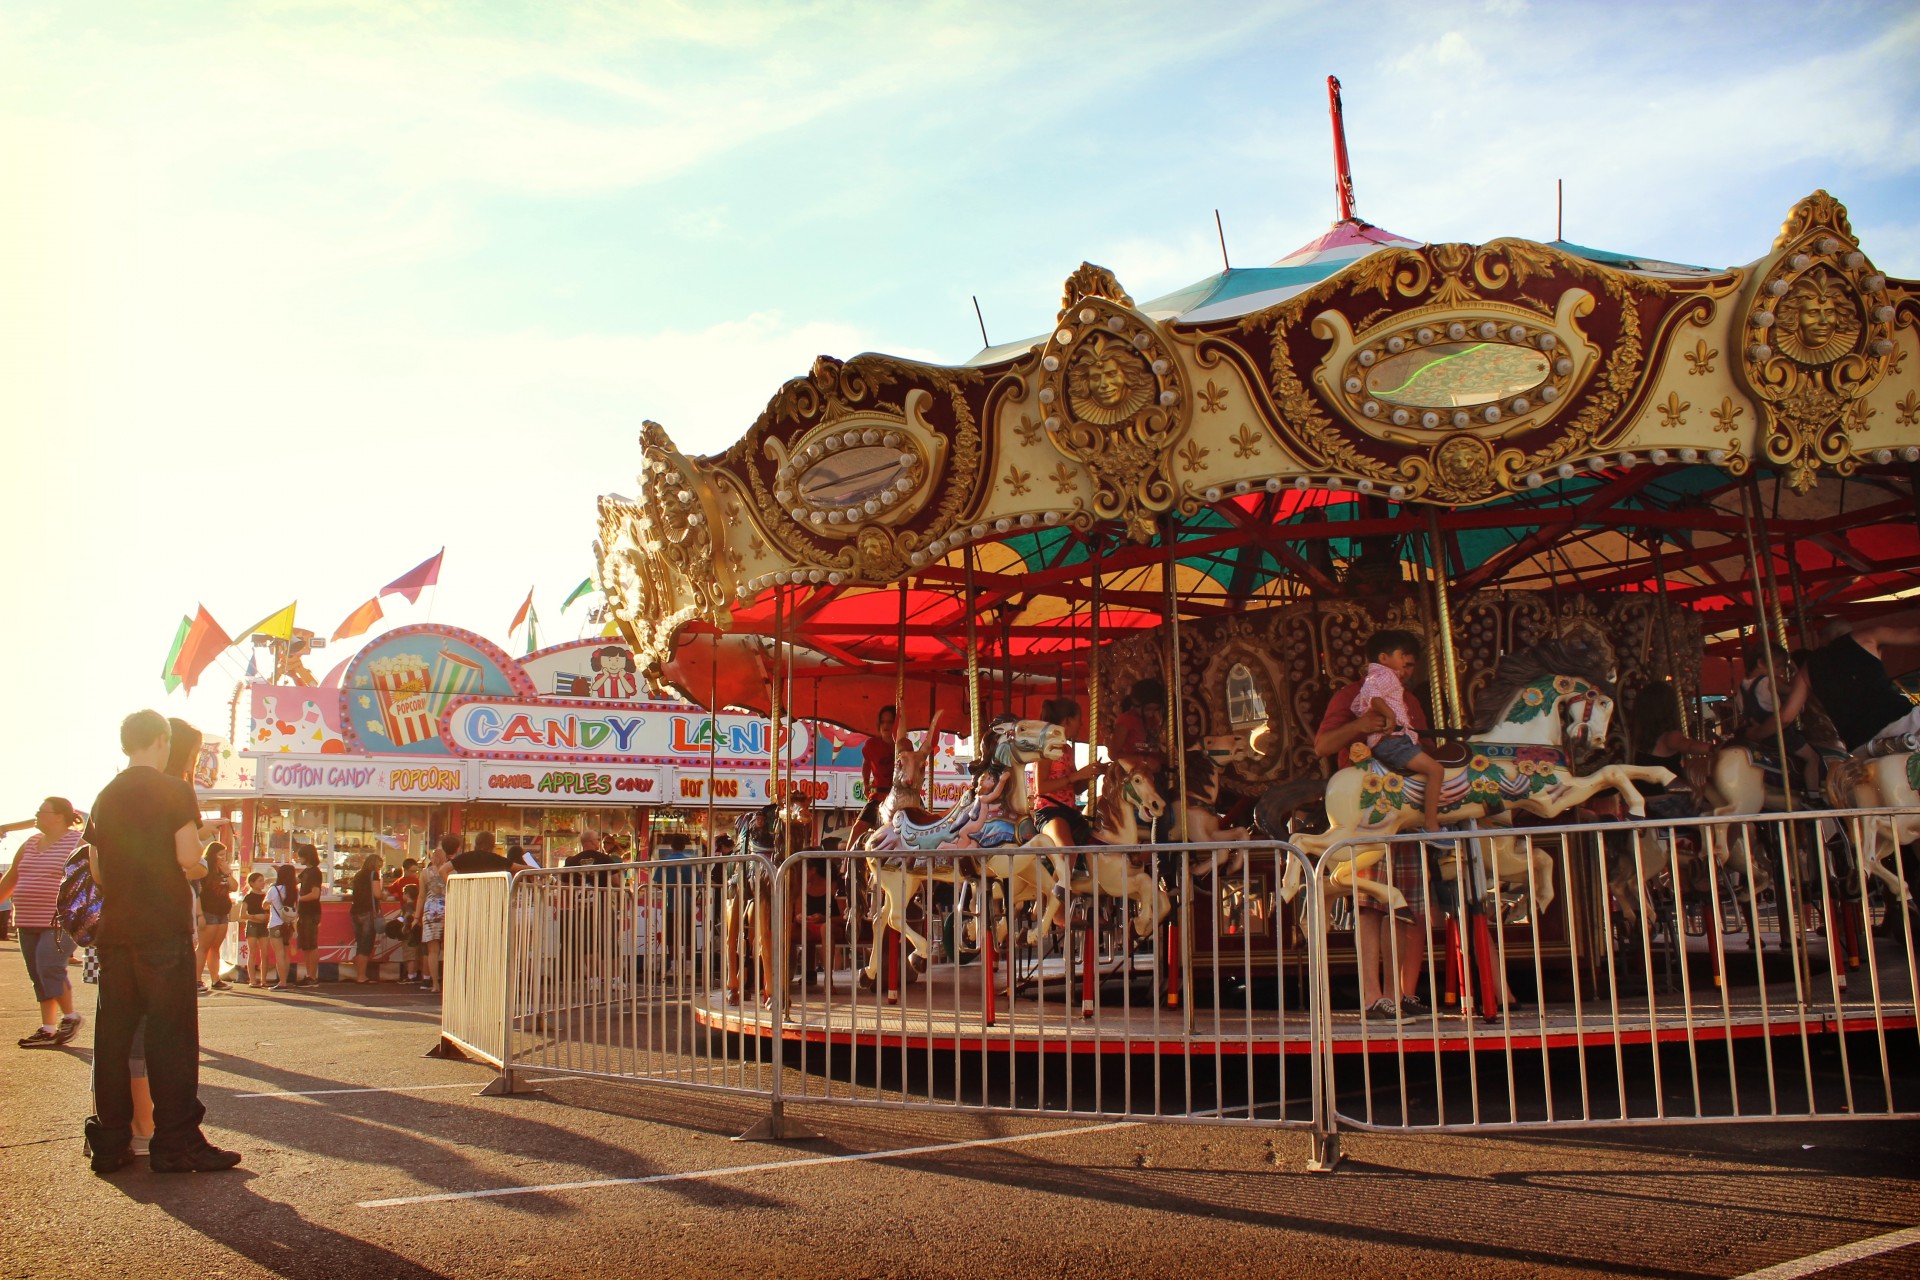 Carnival fairgrounds, people and rides.